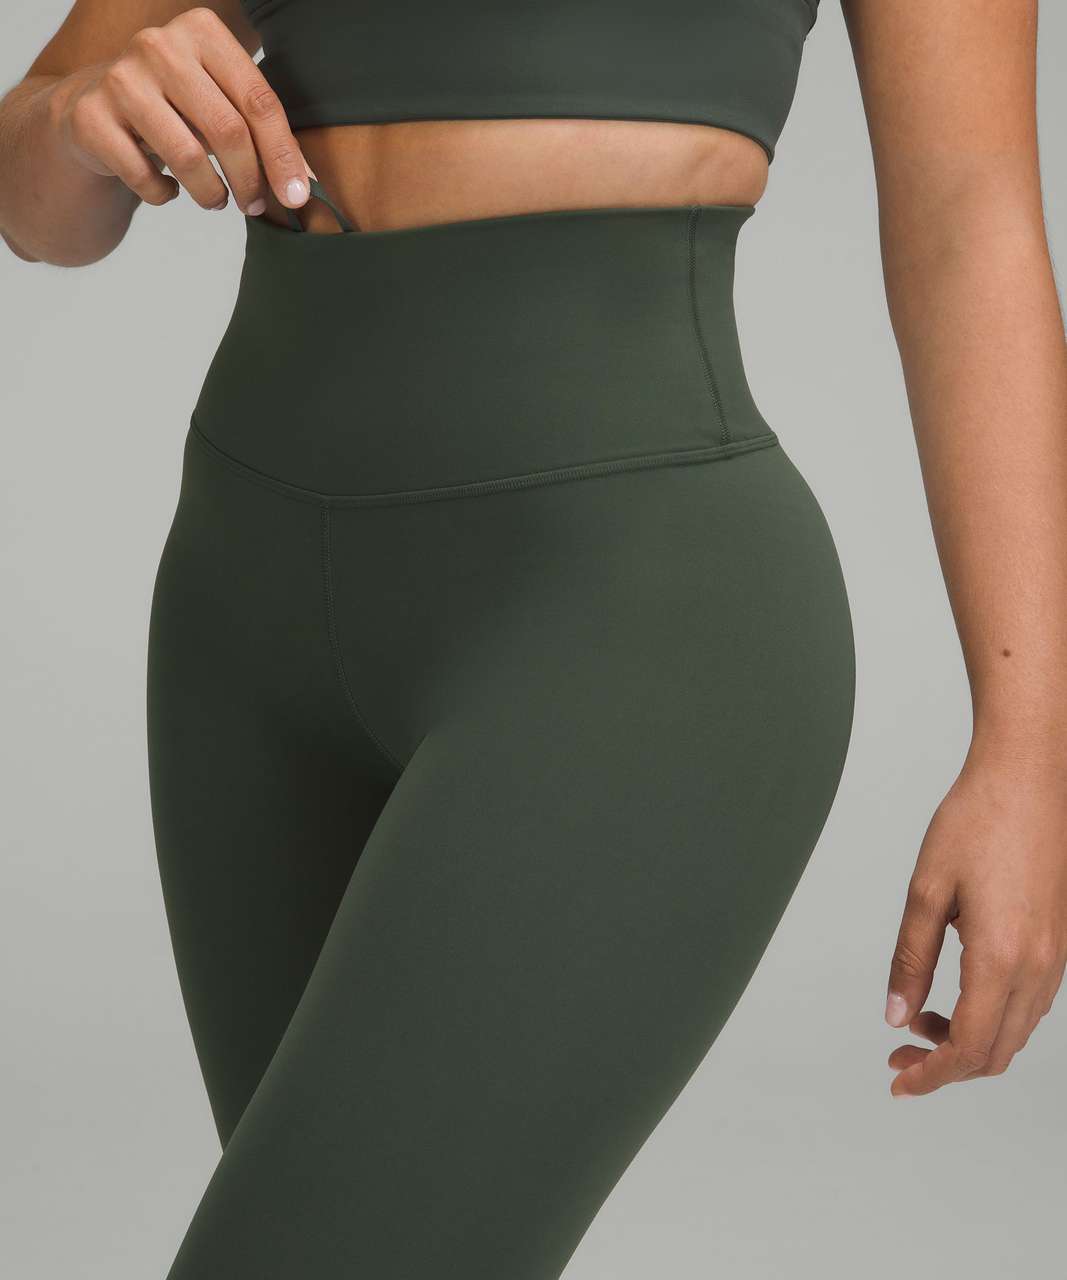 Lululemon Wunder Train Contour Fit High-Rise Tight 28" - Smoked Spruce